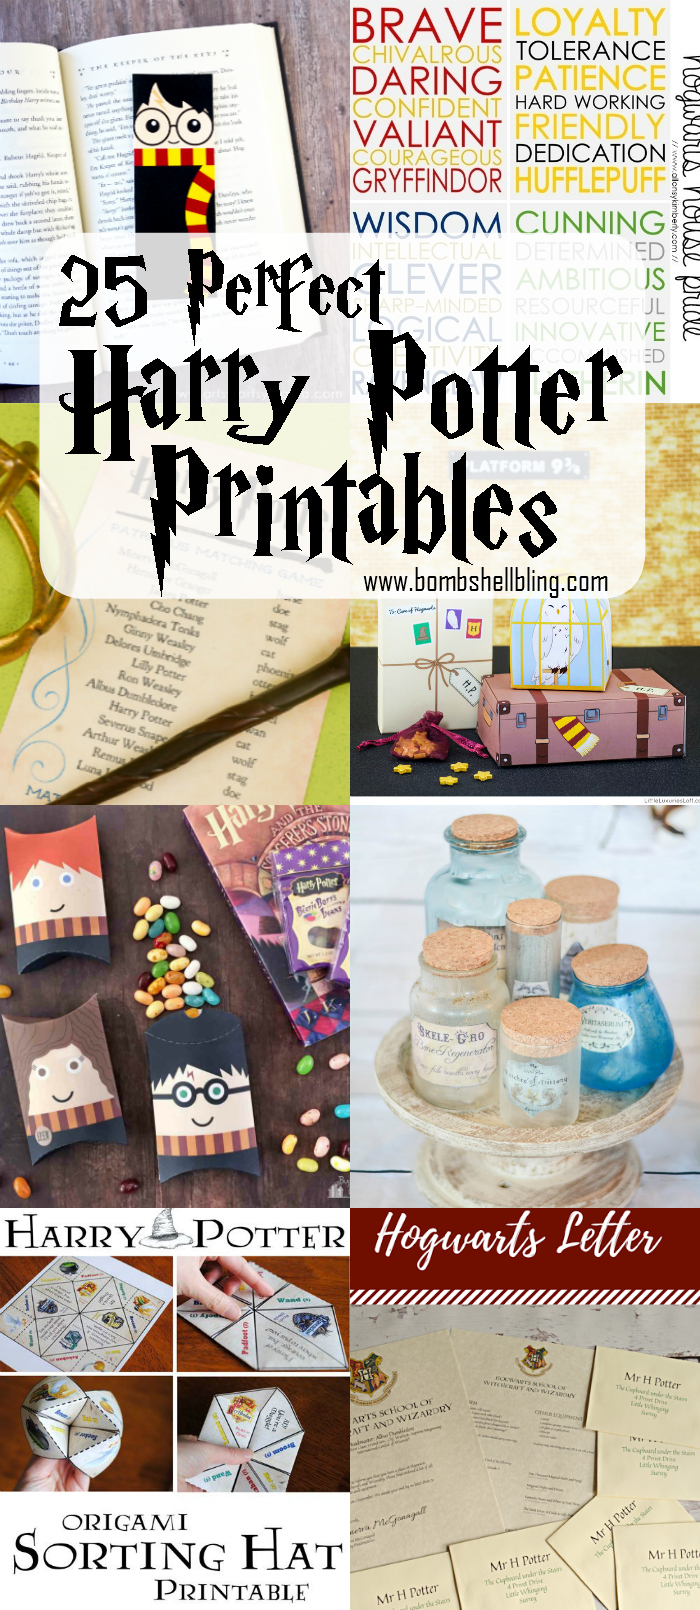 25 Perfect Harry Potter Printables